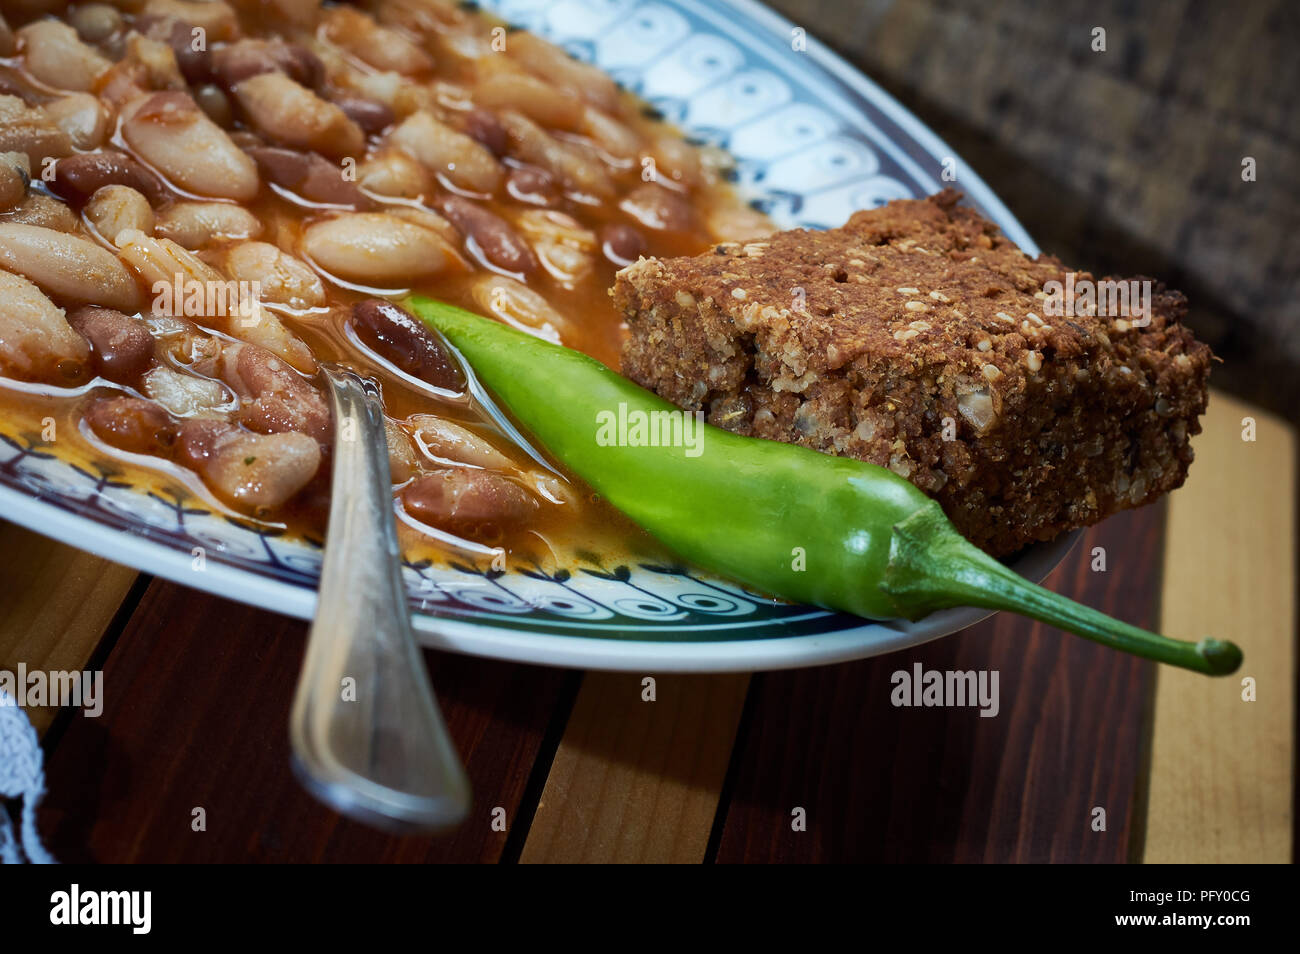 Beans with smoked pork on dinner plate with spelta bread and pepper on the plate Stock Photo